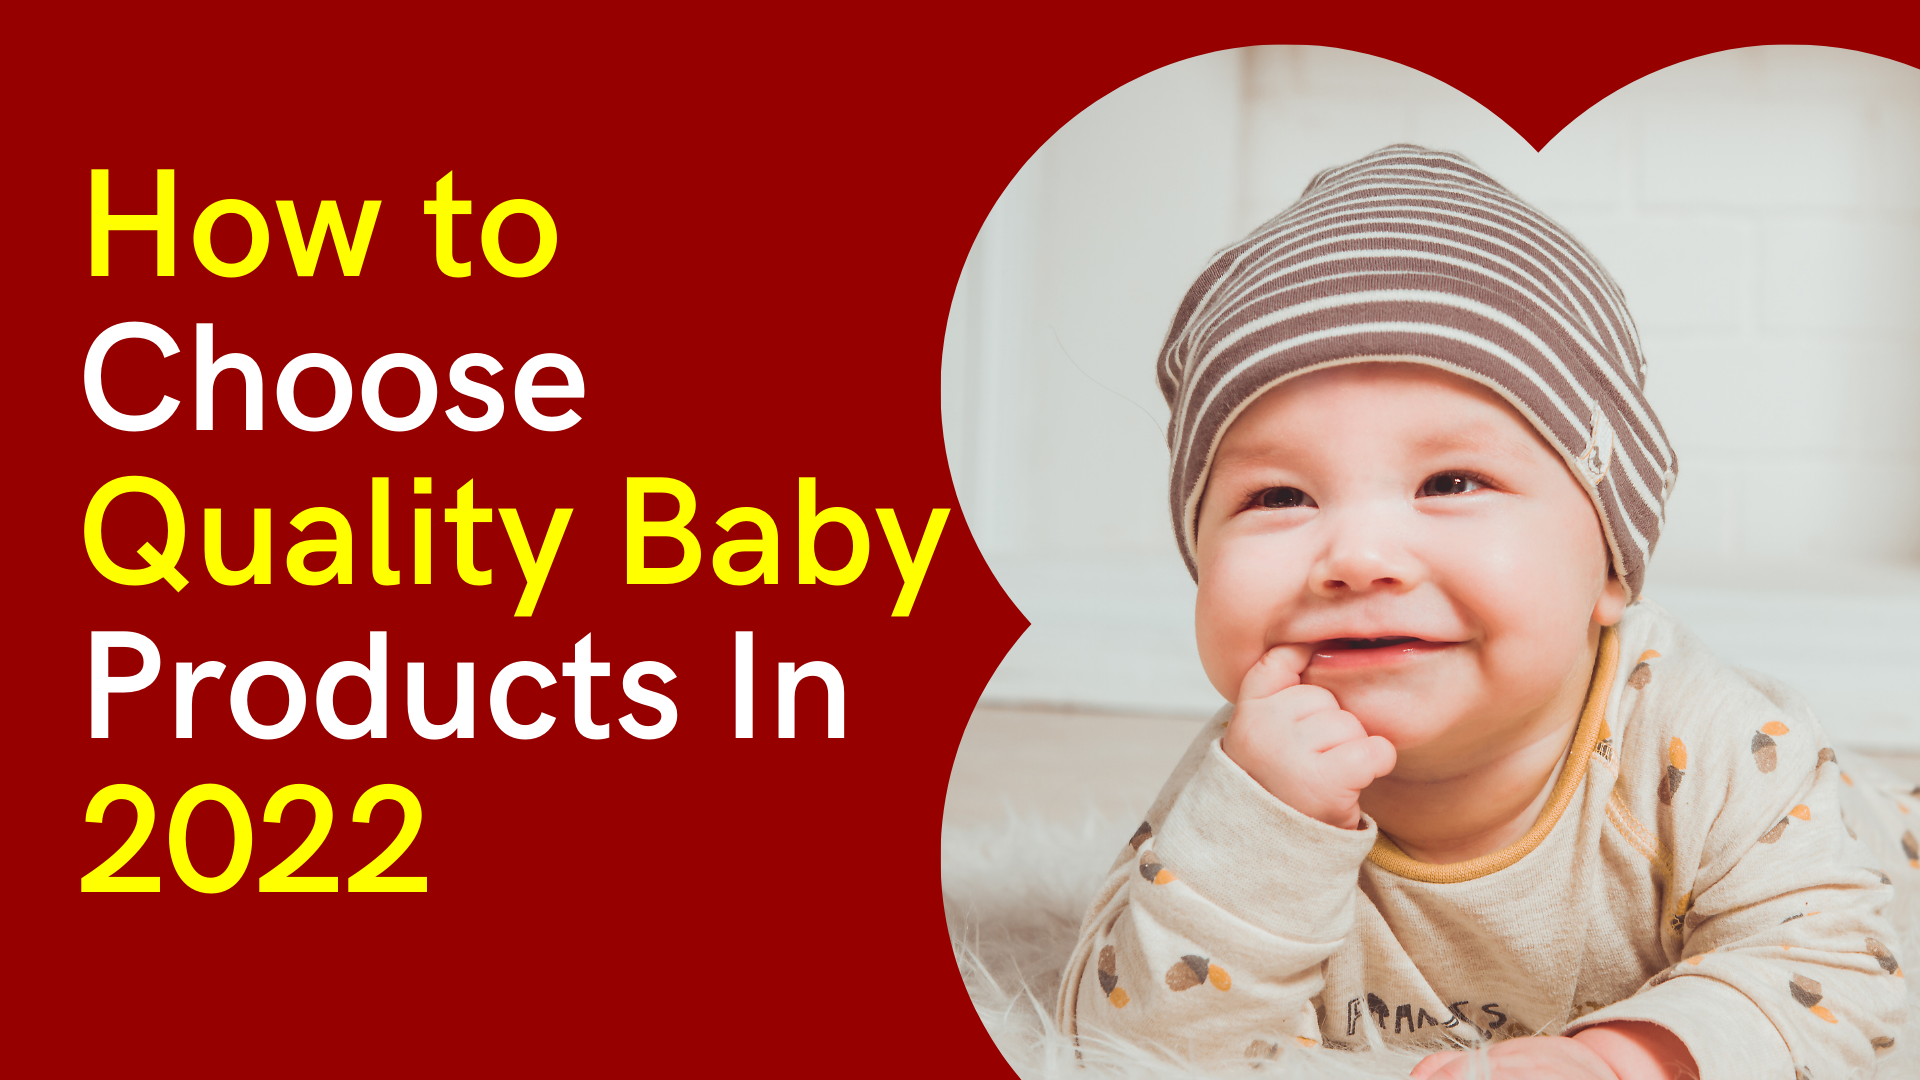 HOG idea on how to choose quality baby products in 2022